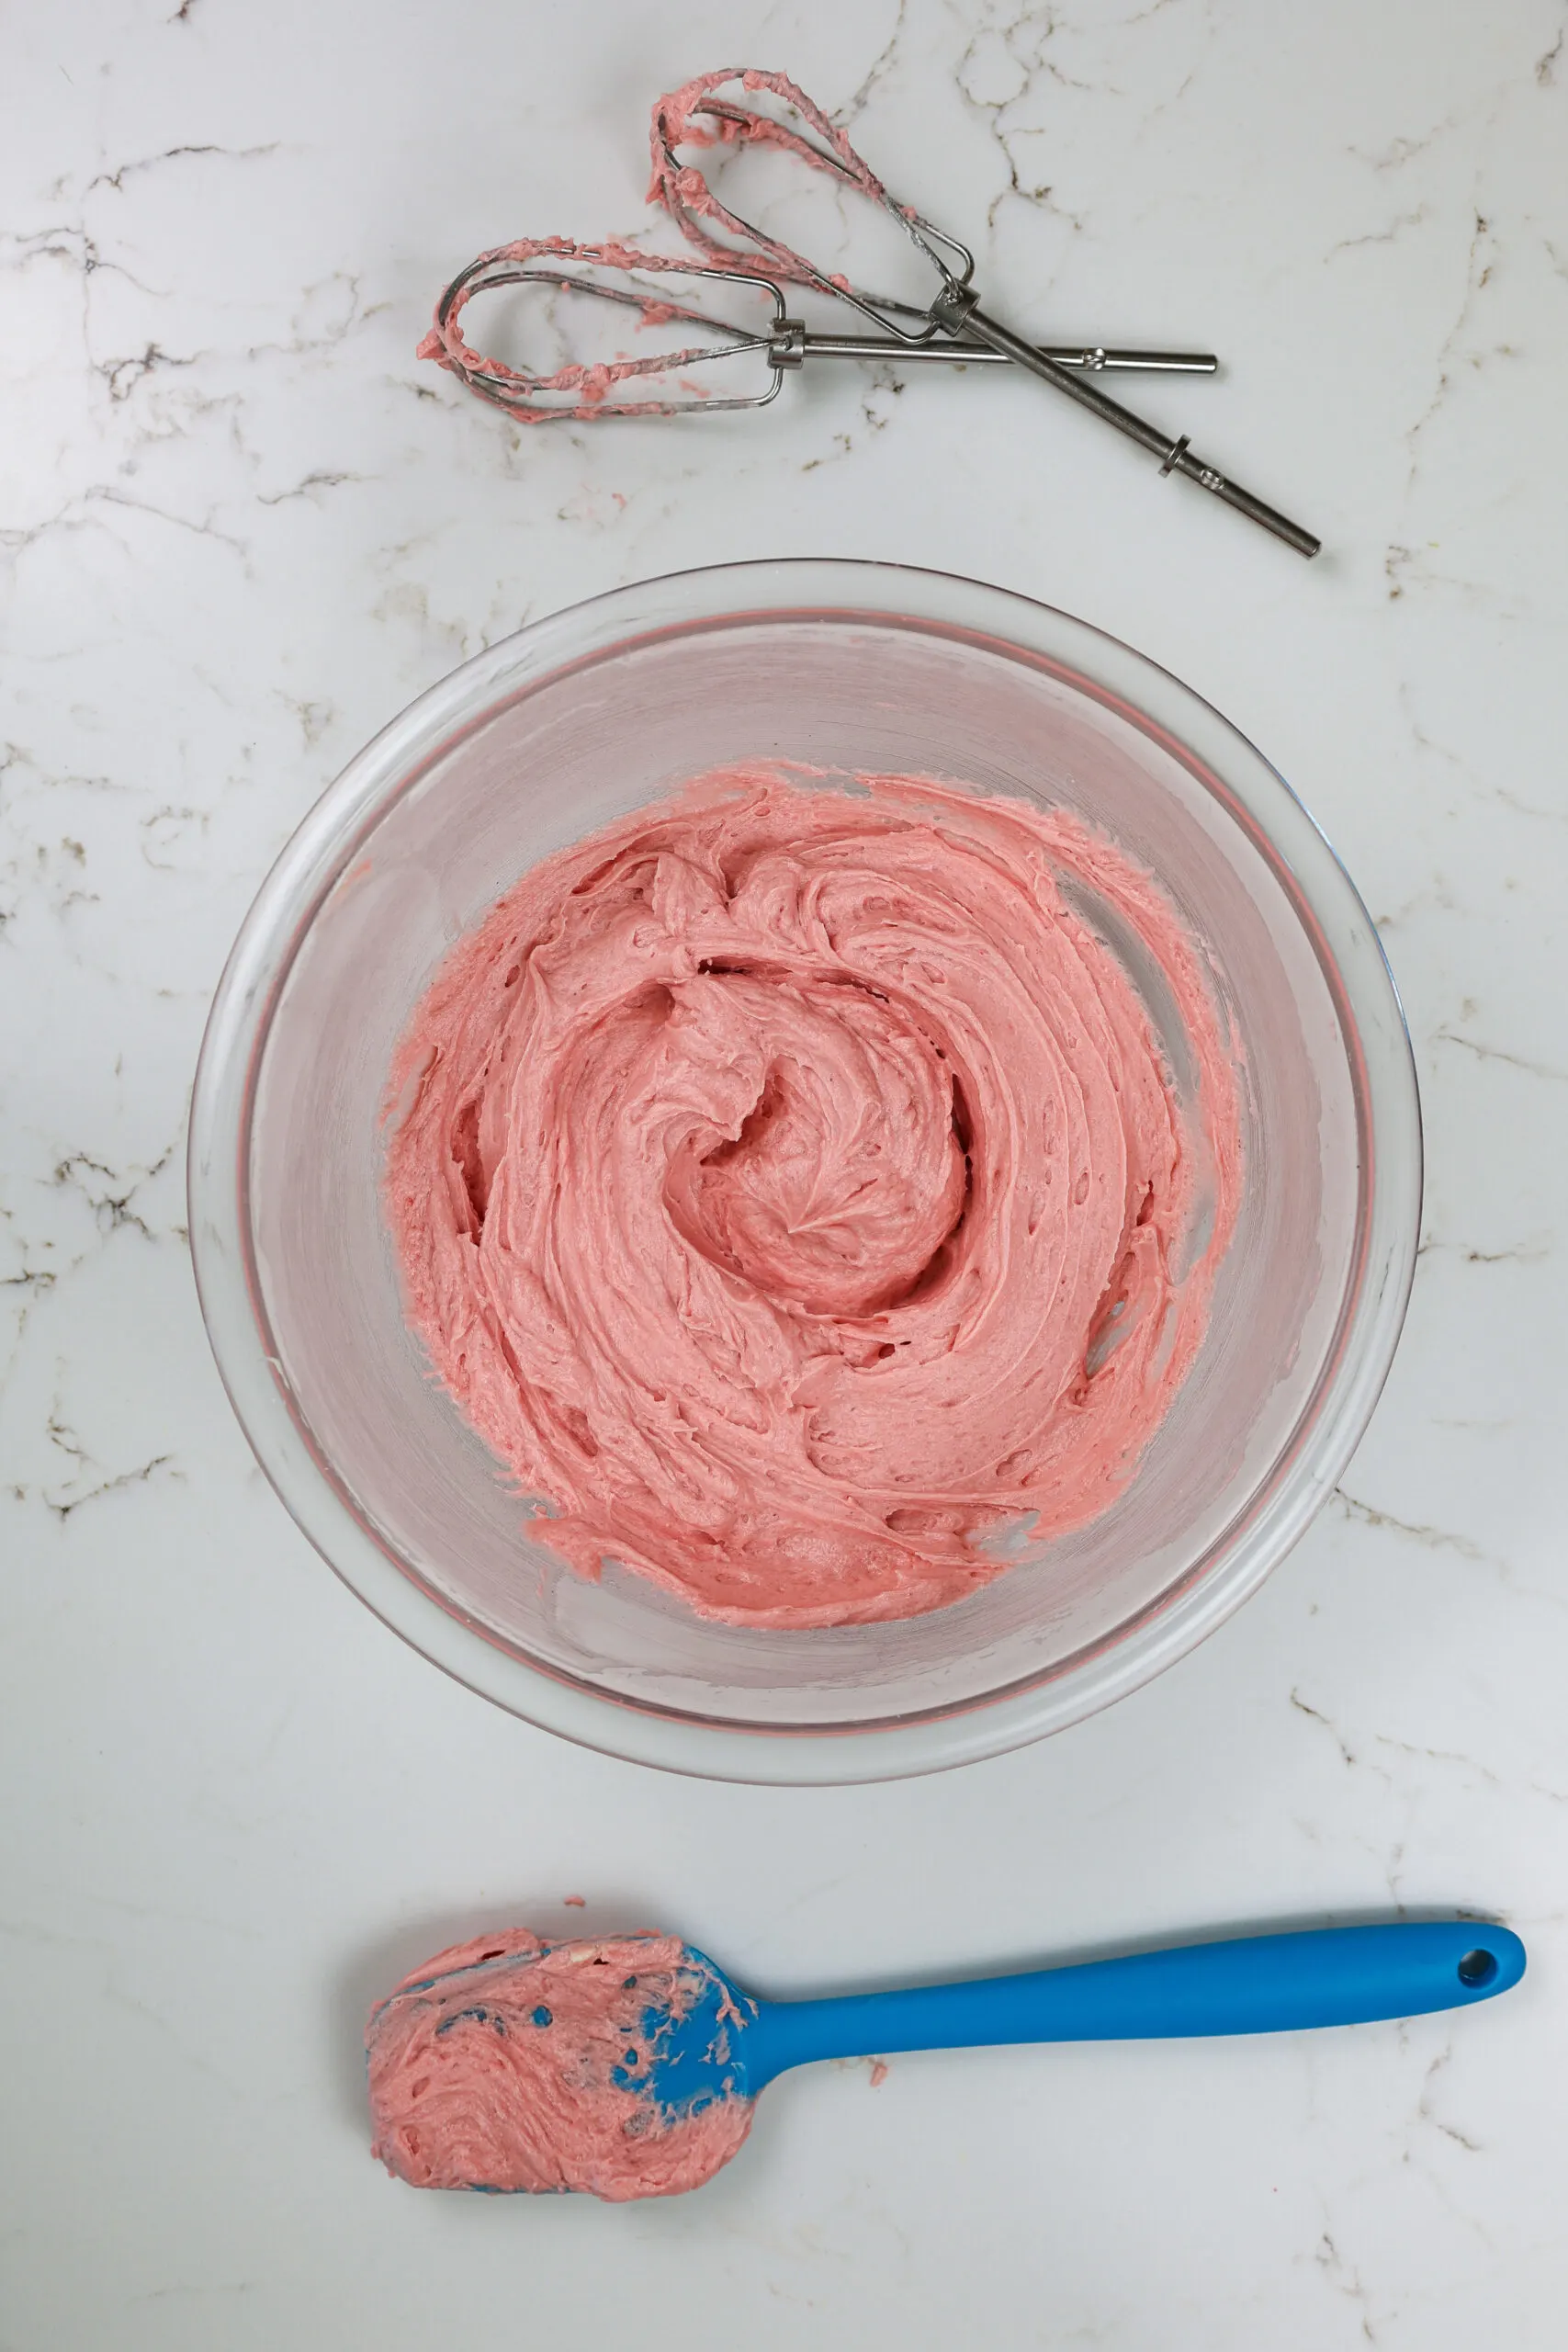 image of strawberry buttercream frosting made with strawberry jam